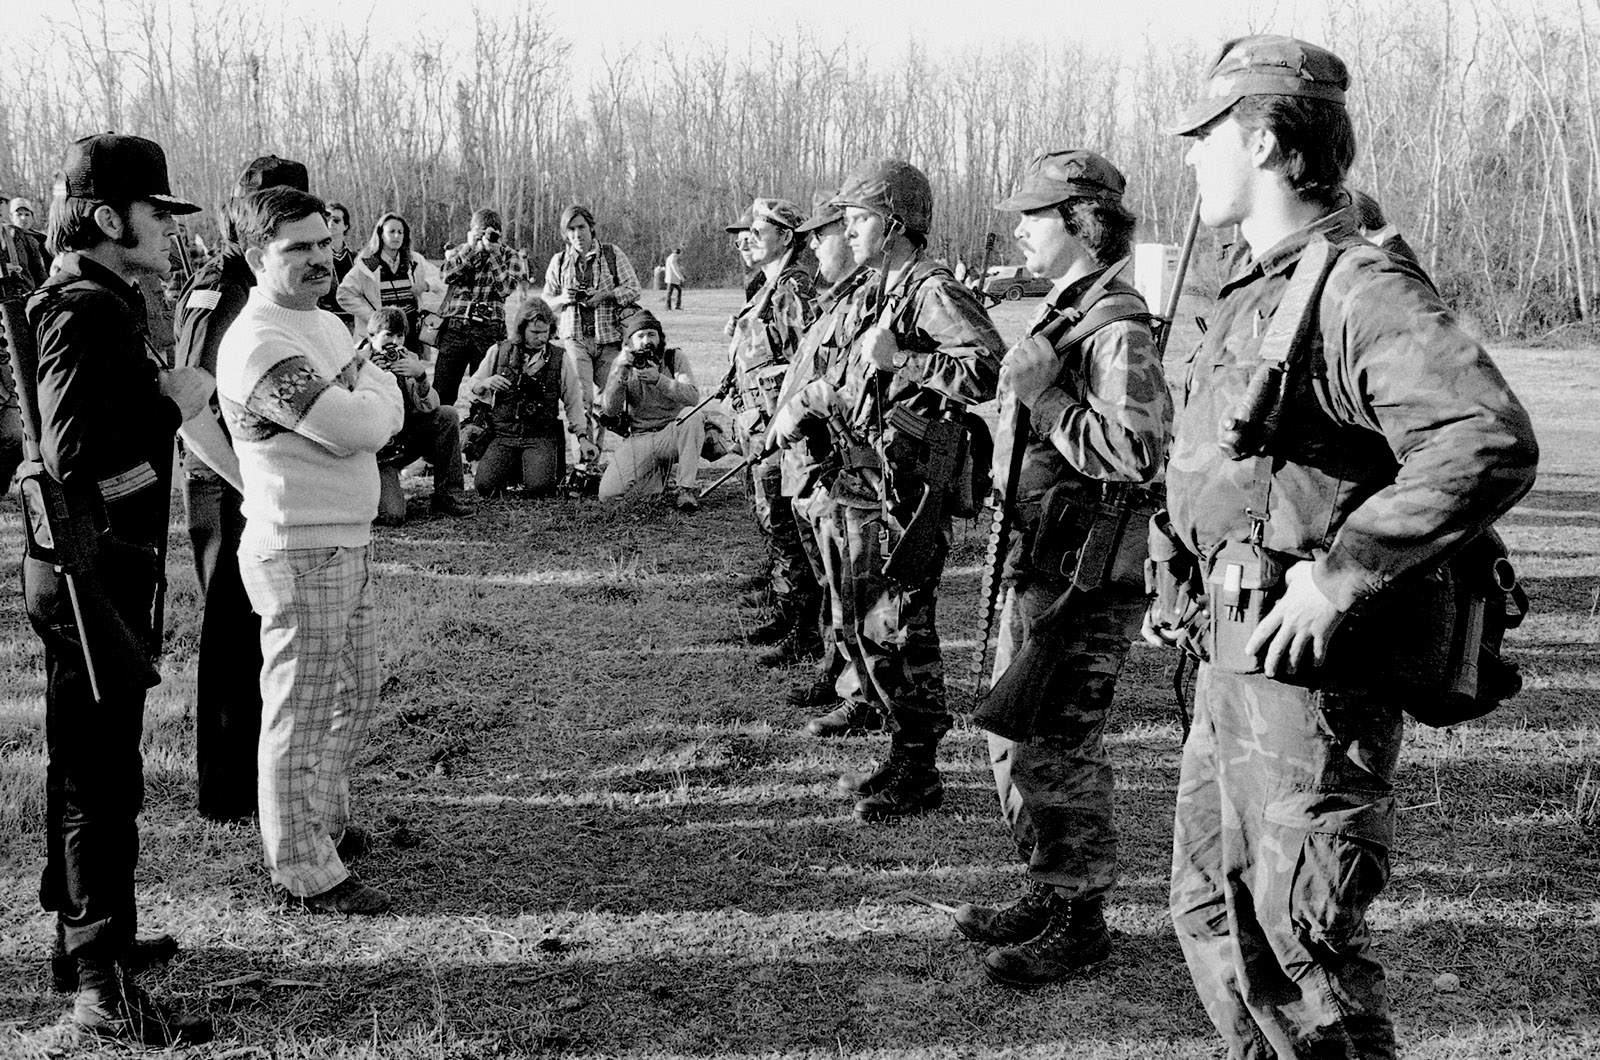 Louis Beam, the Grand Dragon of the Texas Knights of the Ku Klux Klan, inspecting his security forces before a rally against Vietnamese immigrant fishermen along the Gulf Coast, Santa Fe, Texas, 1981